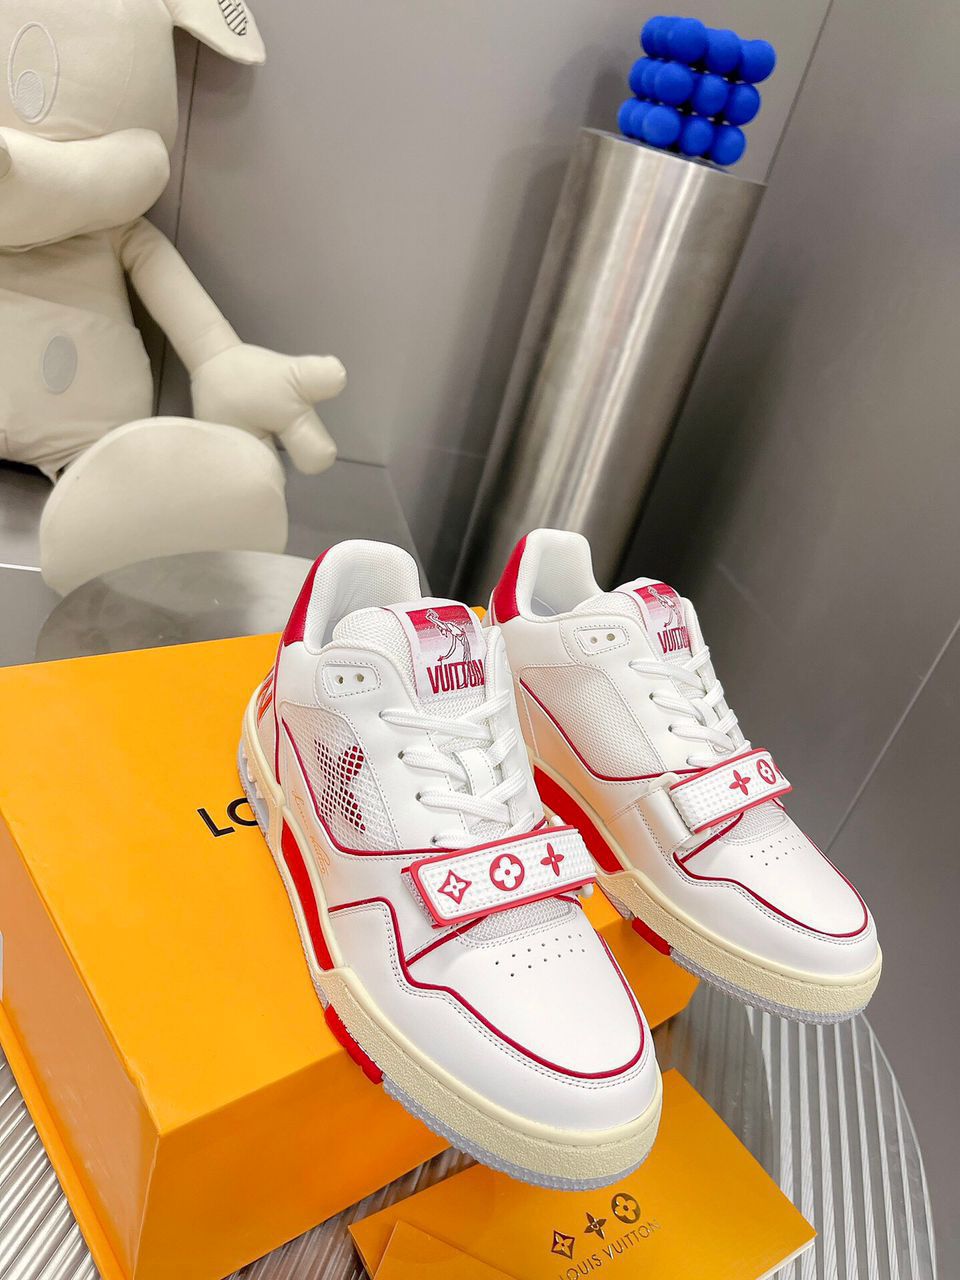 Louis Vuitton Sneakers Online Store, SAVE 56% 